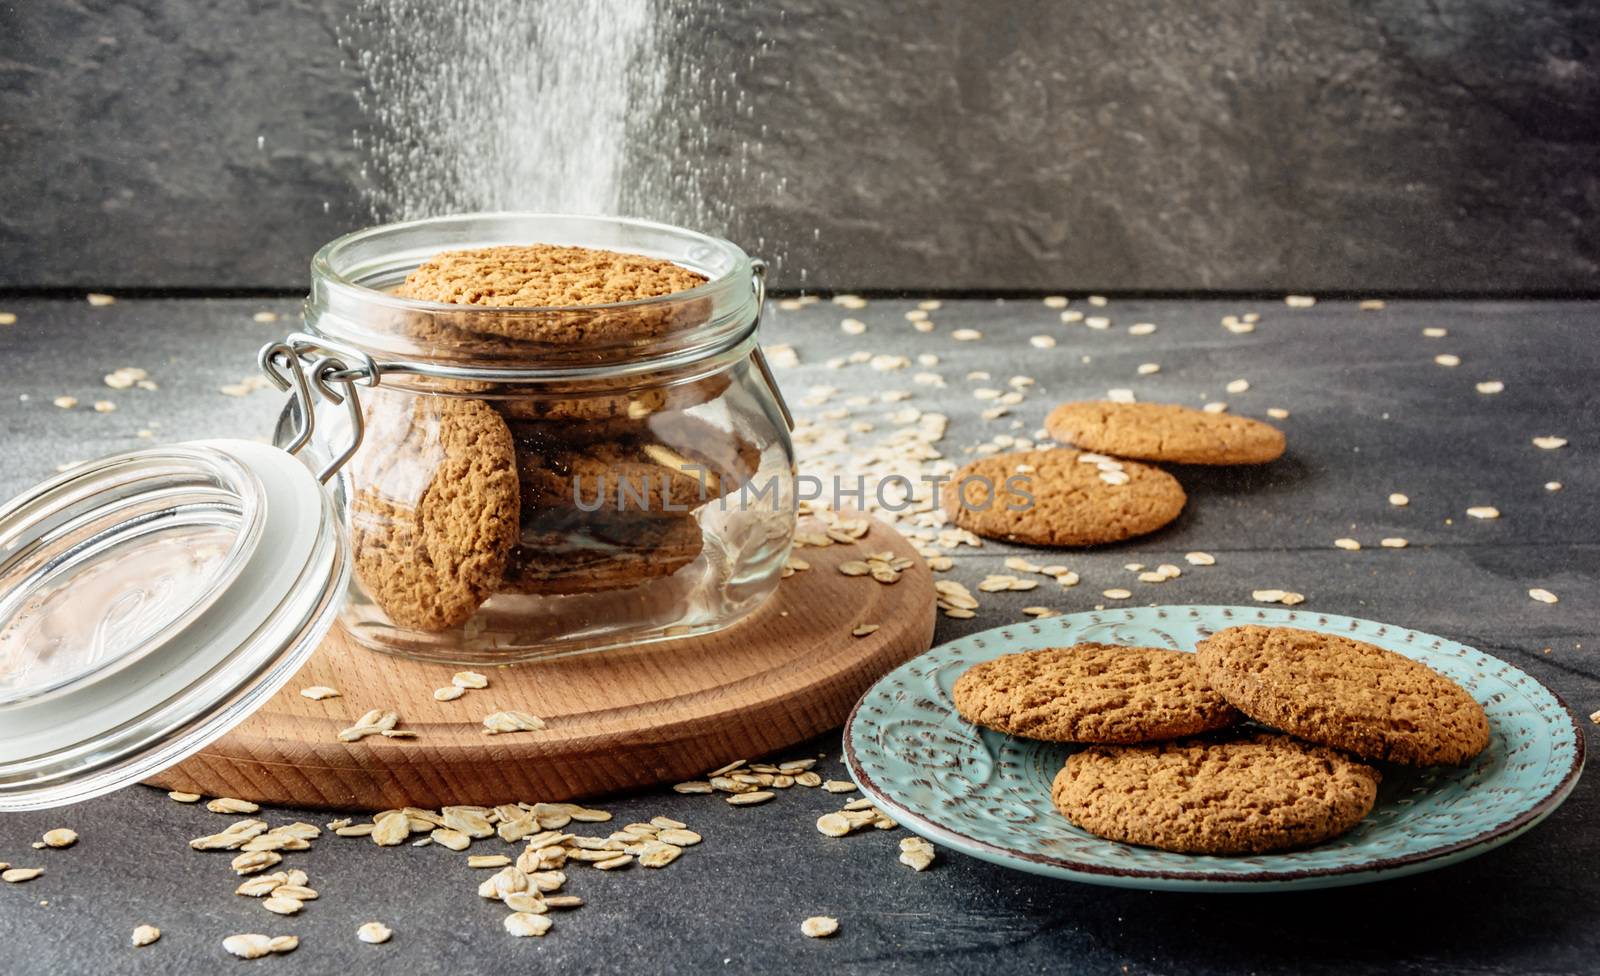 Oat cookies lay on a plate and bank with oatmeal cookies standing on a wooden board.